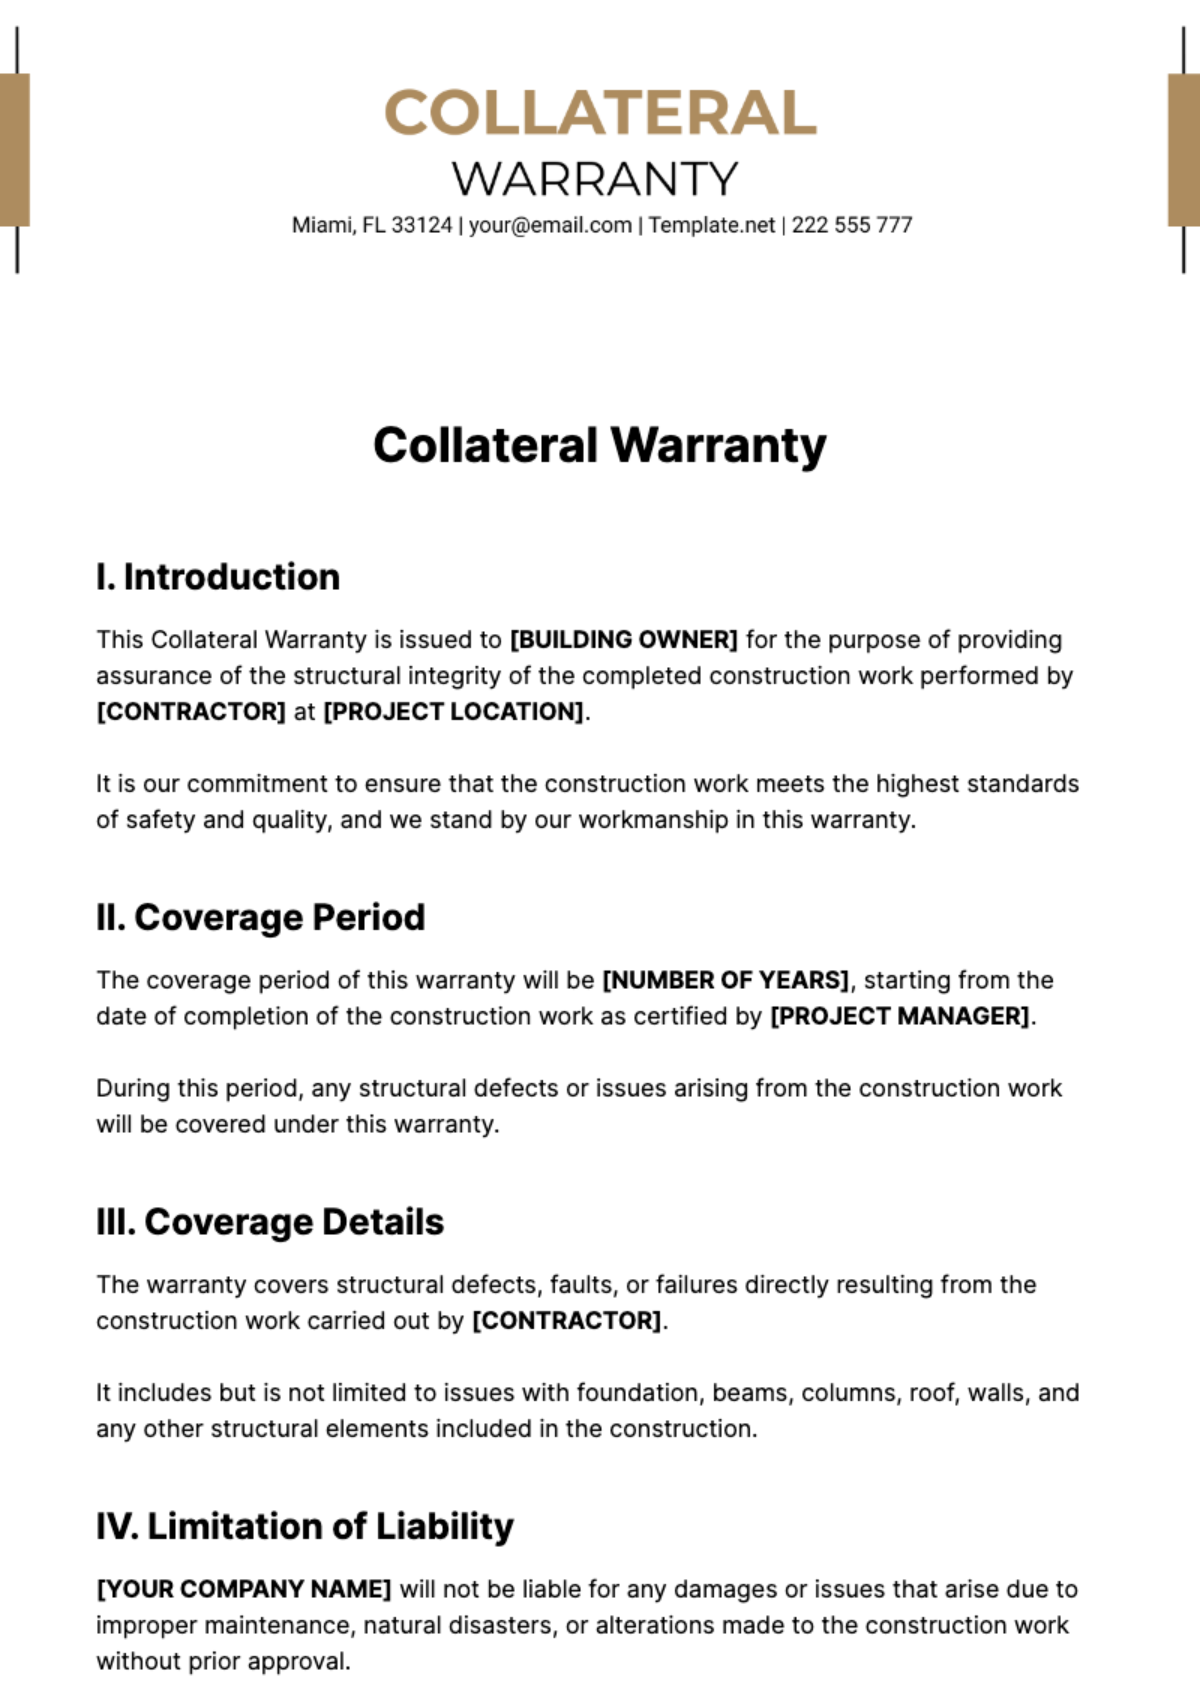 Free Collateral Warranty Template